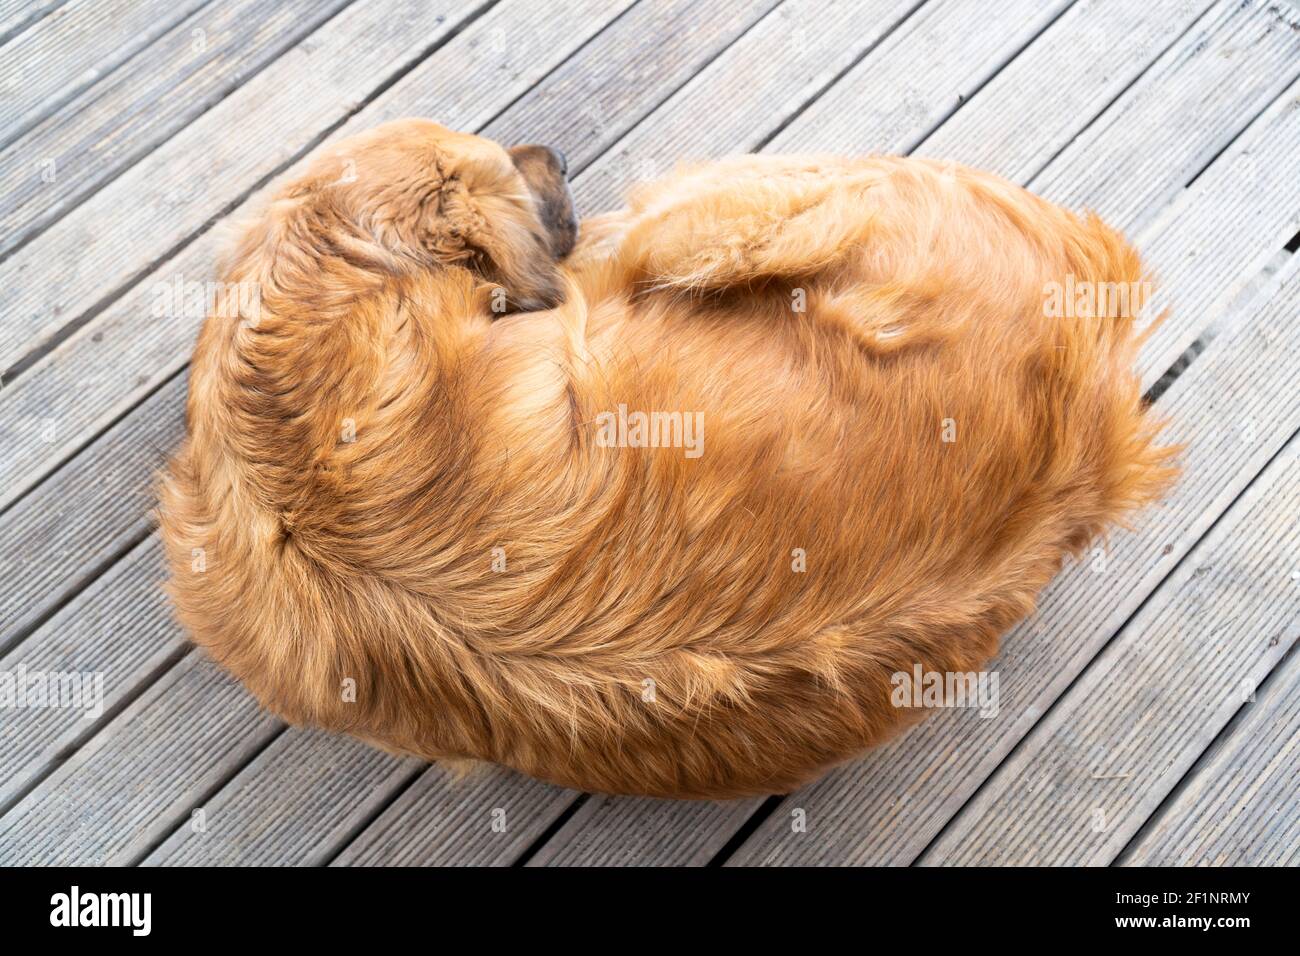 Top view on a gold brown golden retriever sleeping on a wooden floor Stock Photo